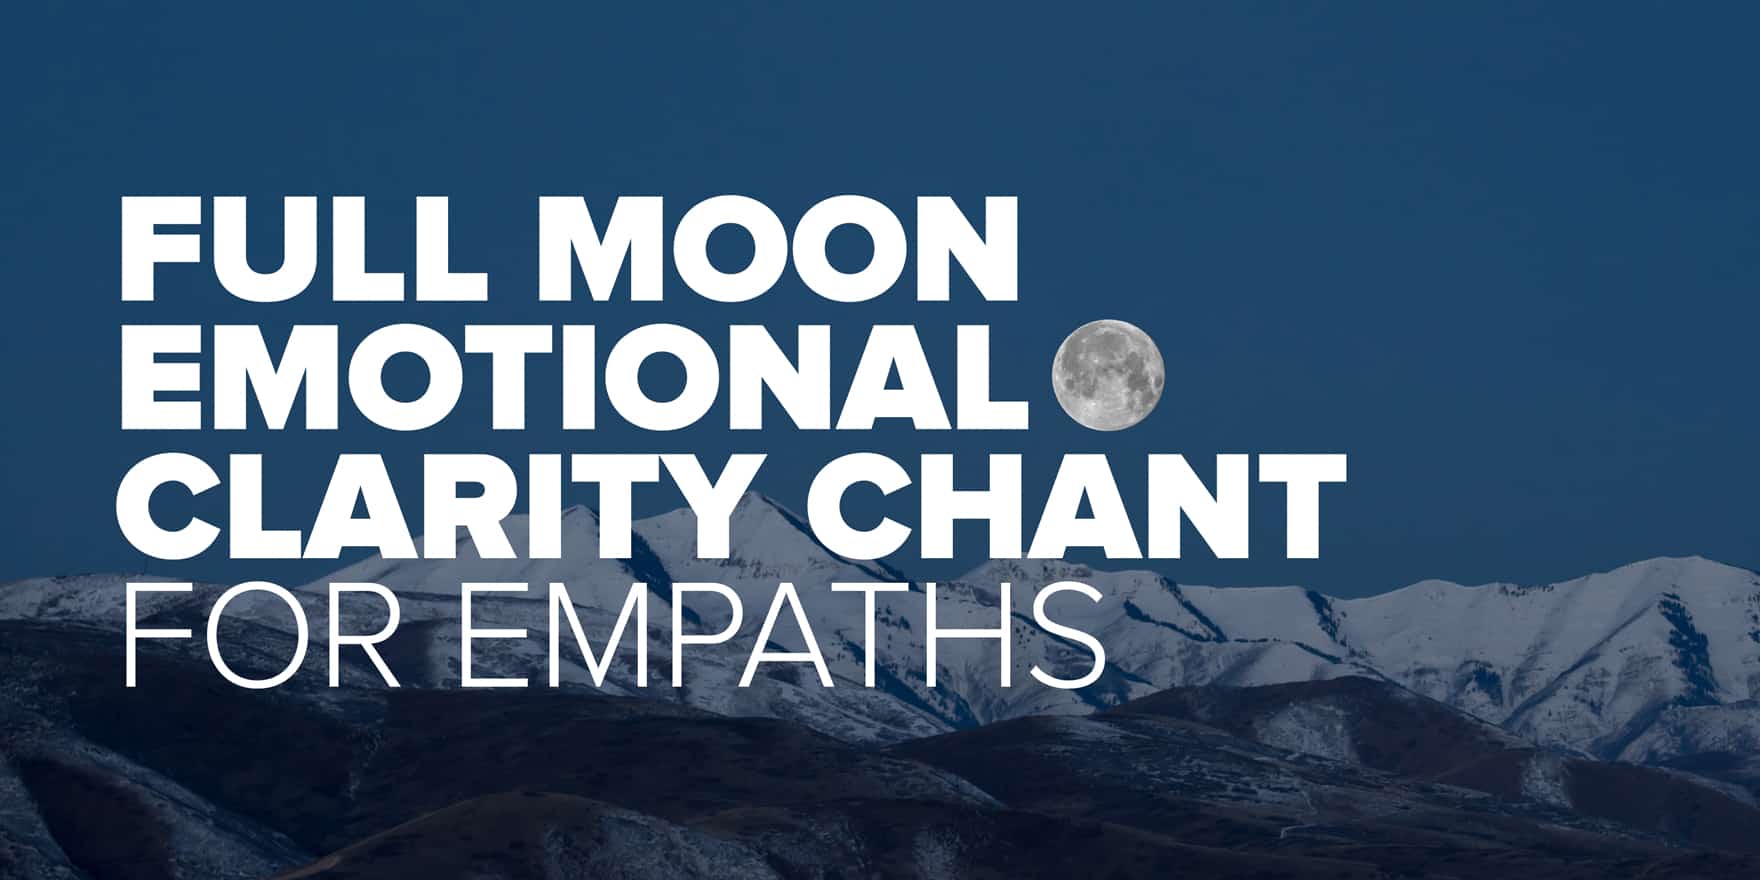 Full Moon Emotional Clarity Chant for Empaths